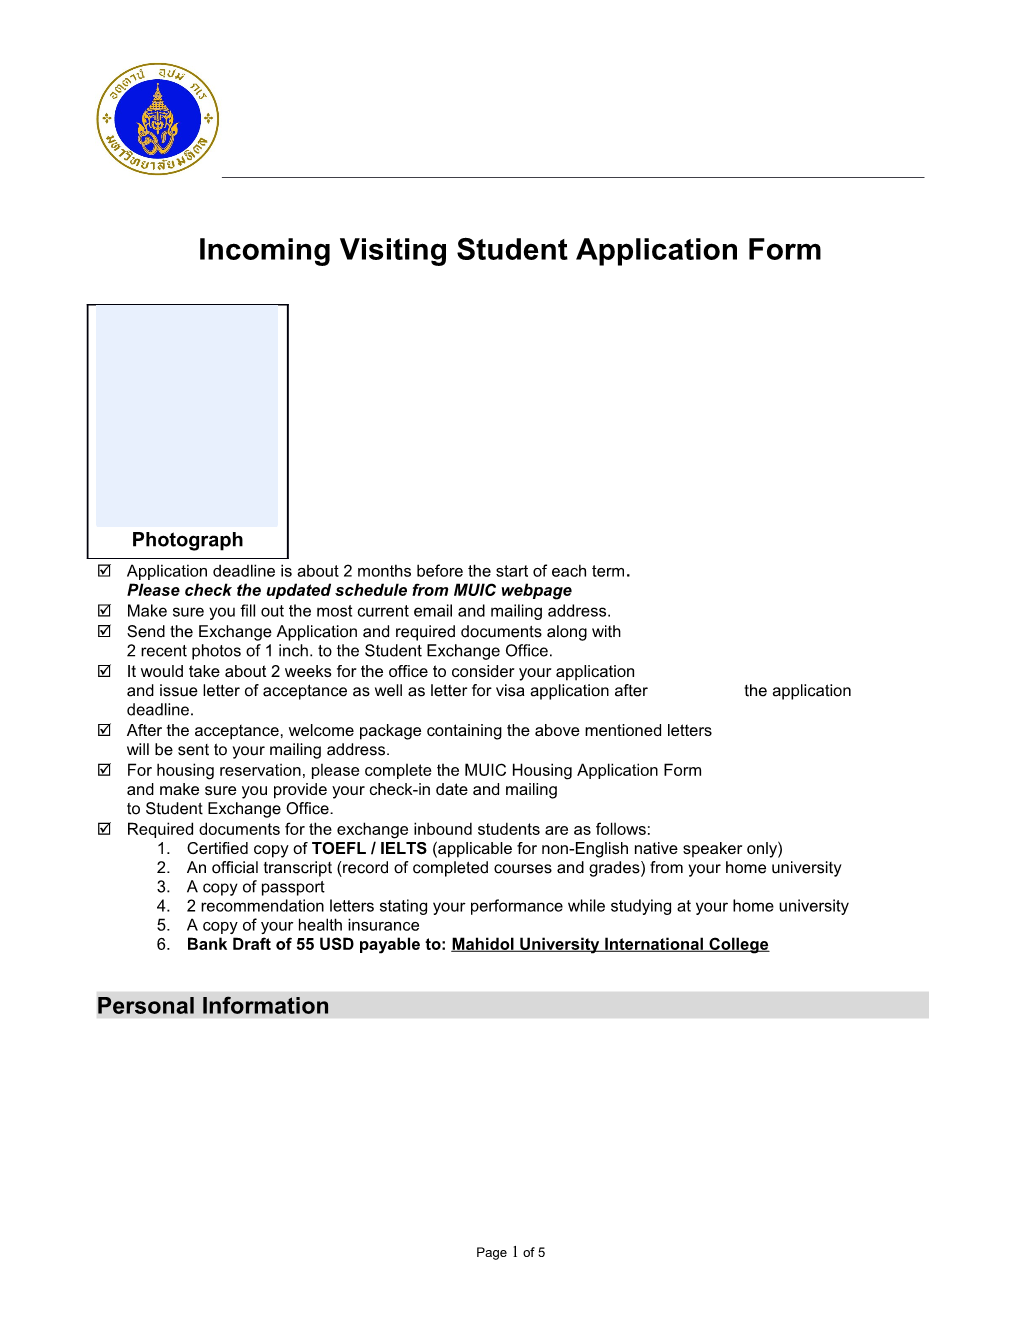 Incoming Exchange Student Application Form